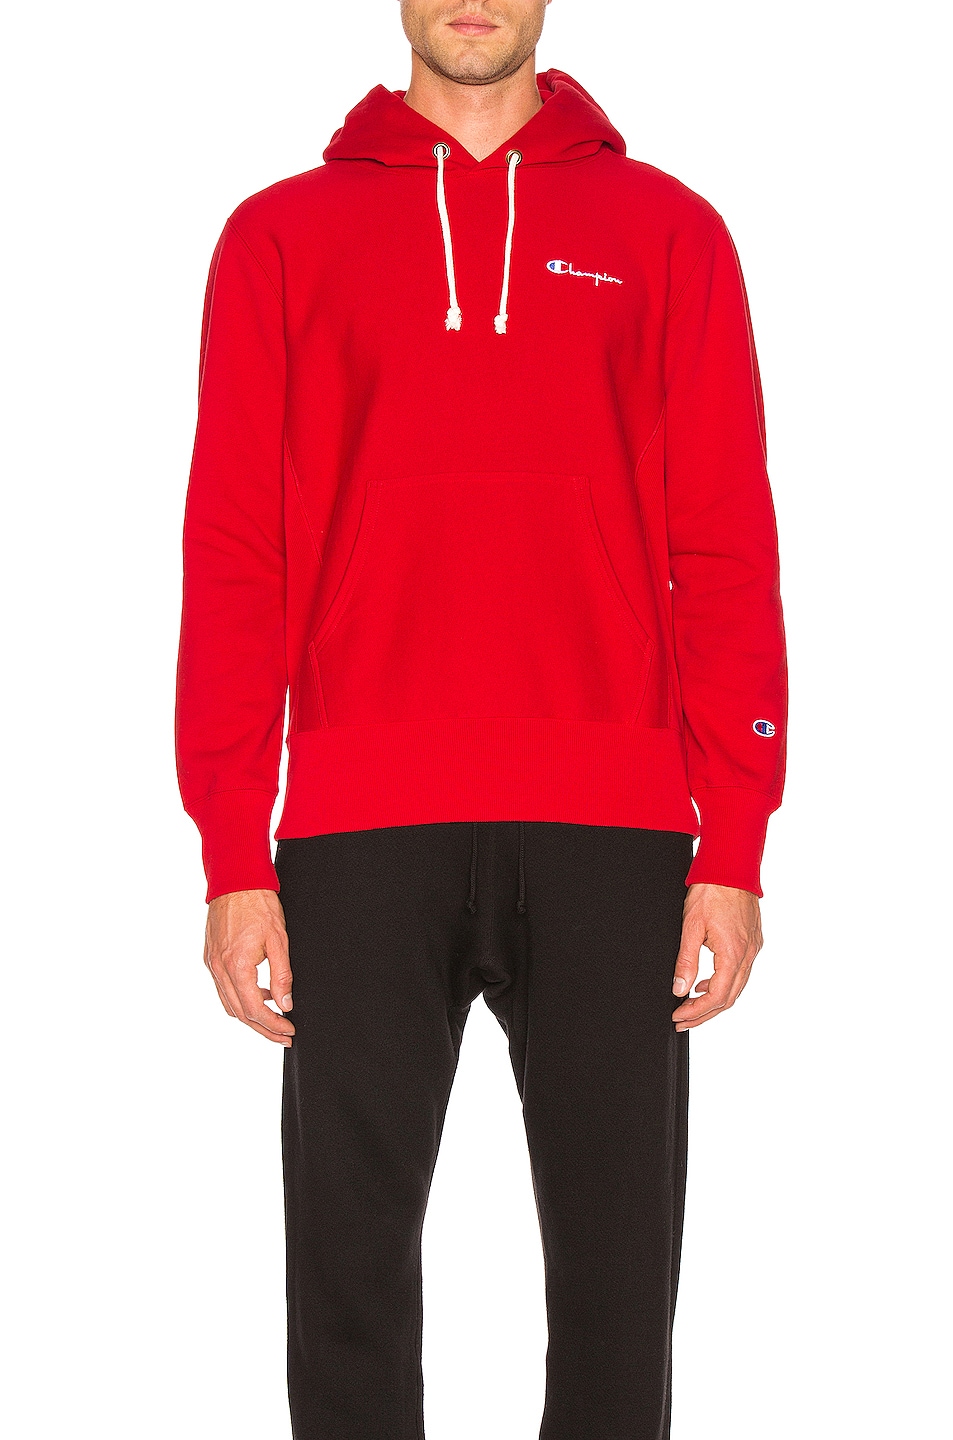 Image 1 of Champion Reverse Weave Champion Hooded Sweatshirt in Red